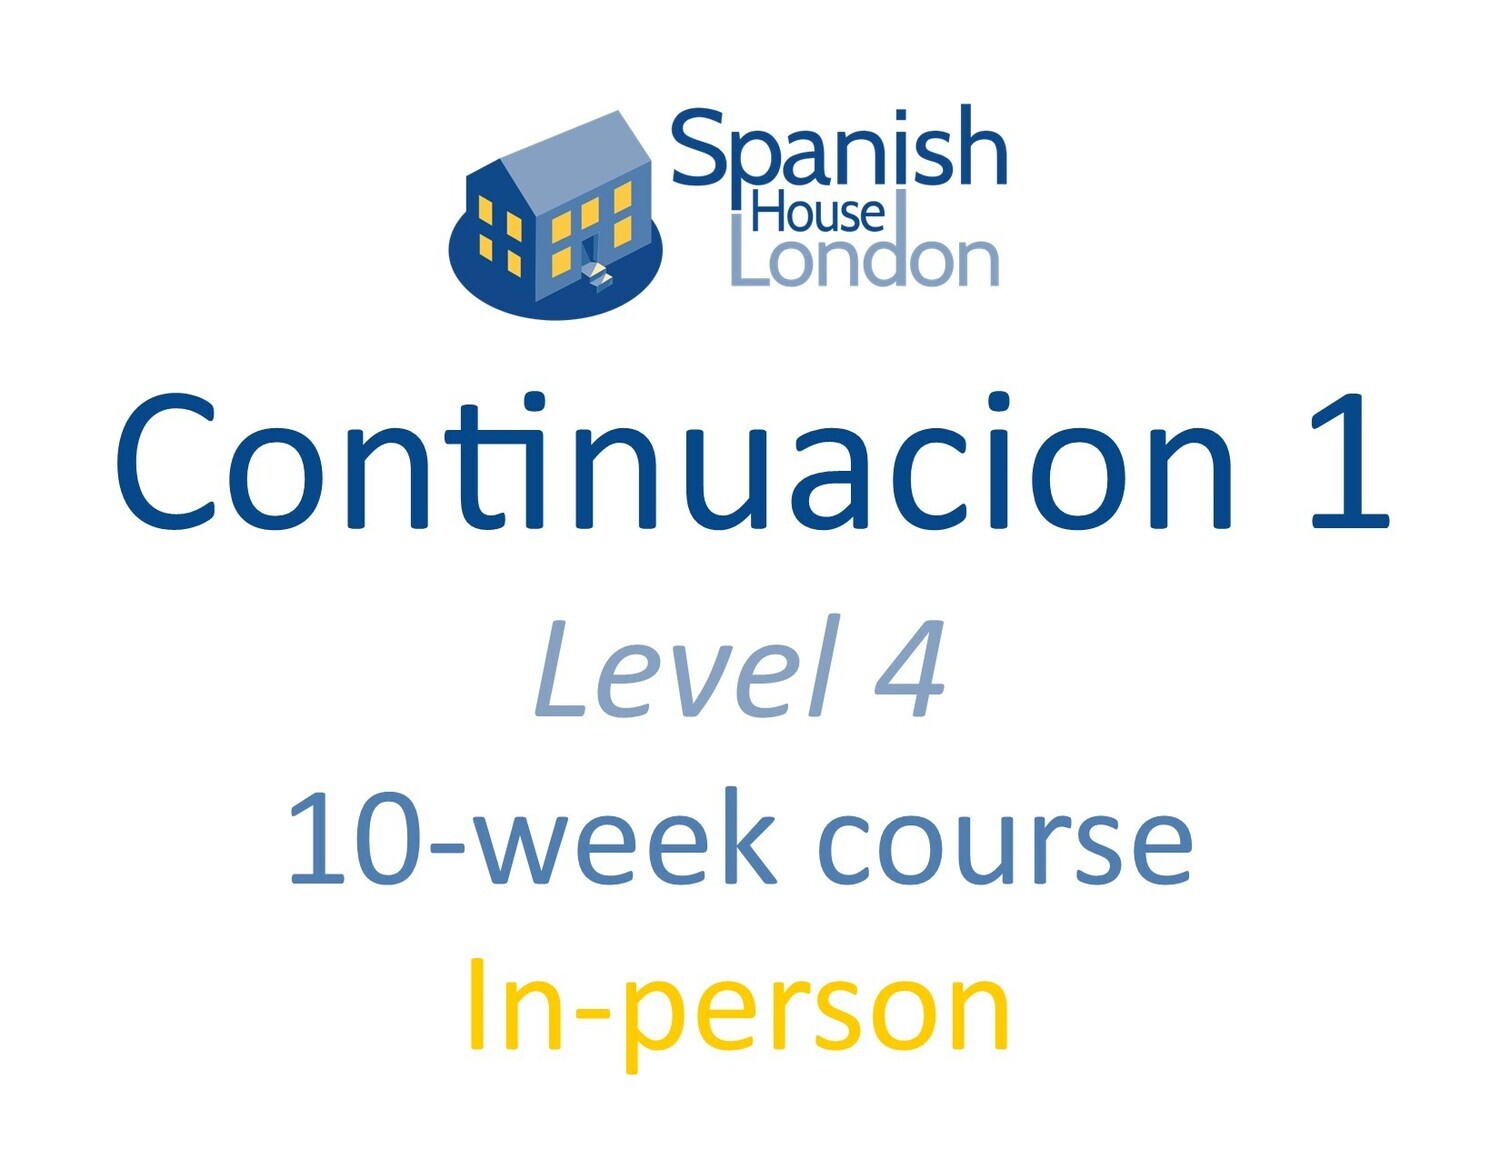 Continuacion 1 Course starting on 16th November at 7.30pm in Euston / King's Cross